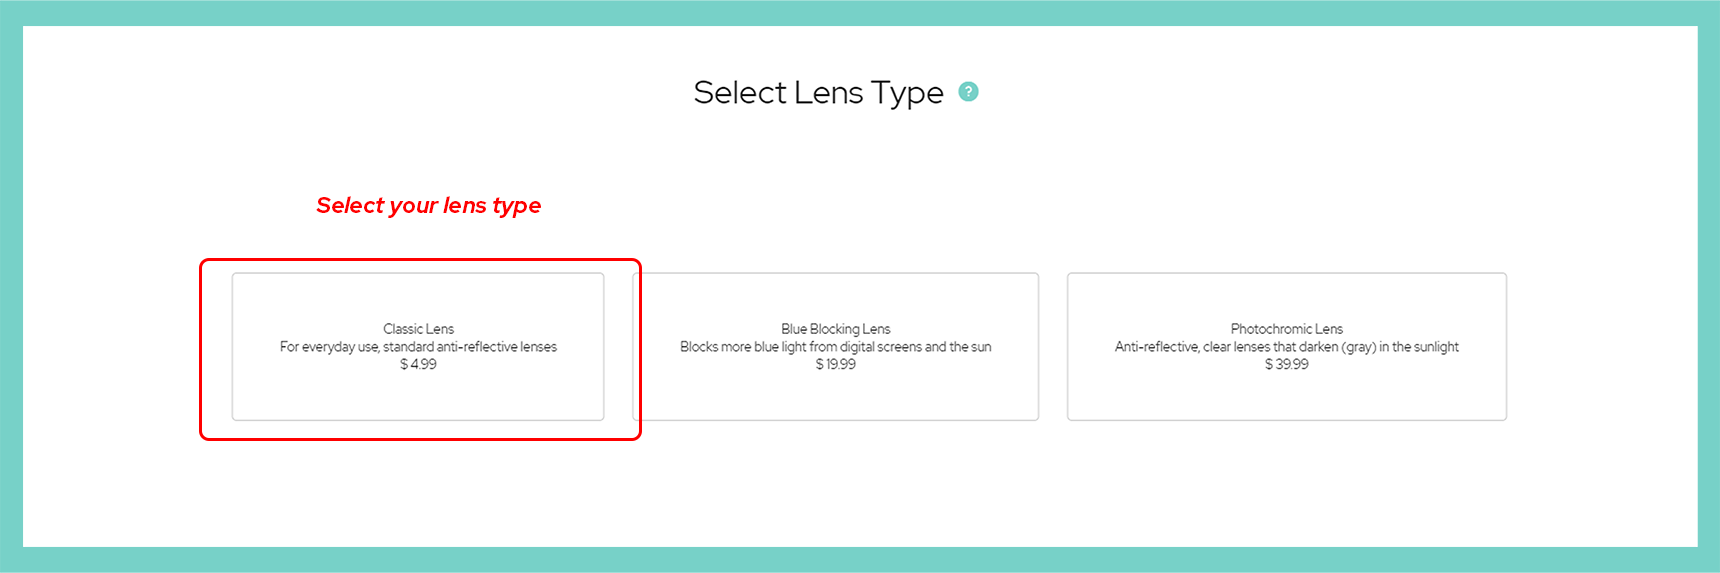 select your lens type